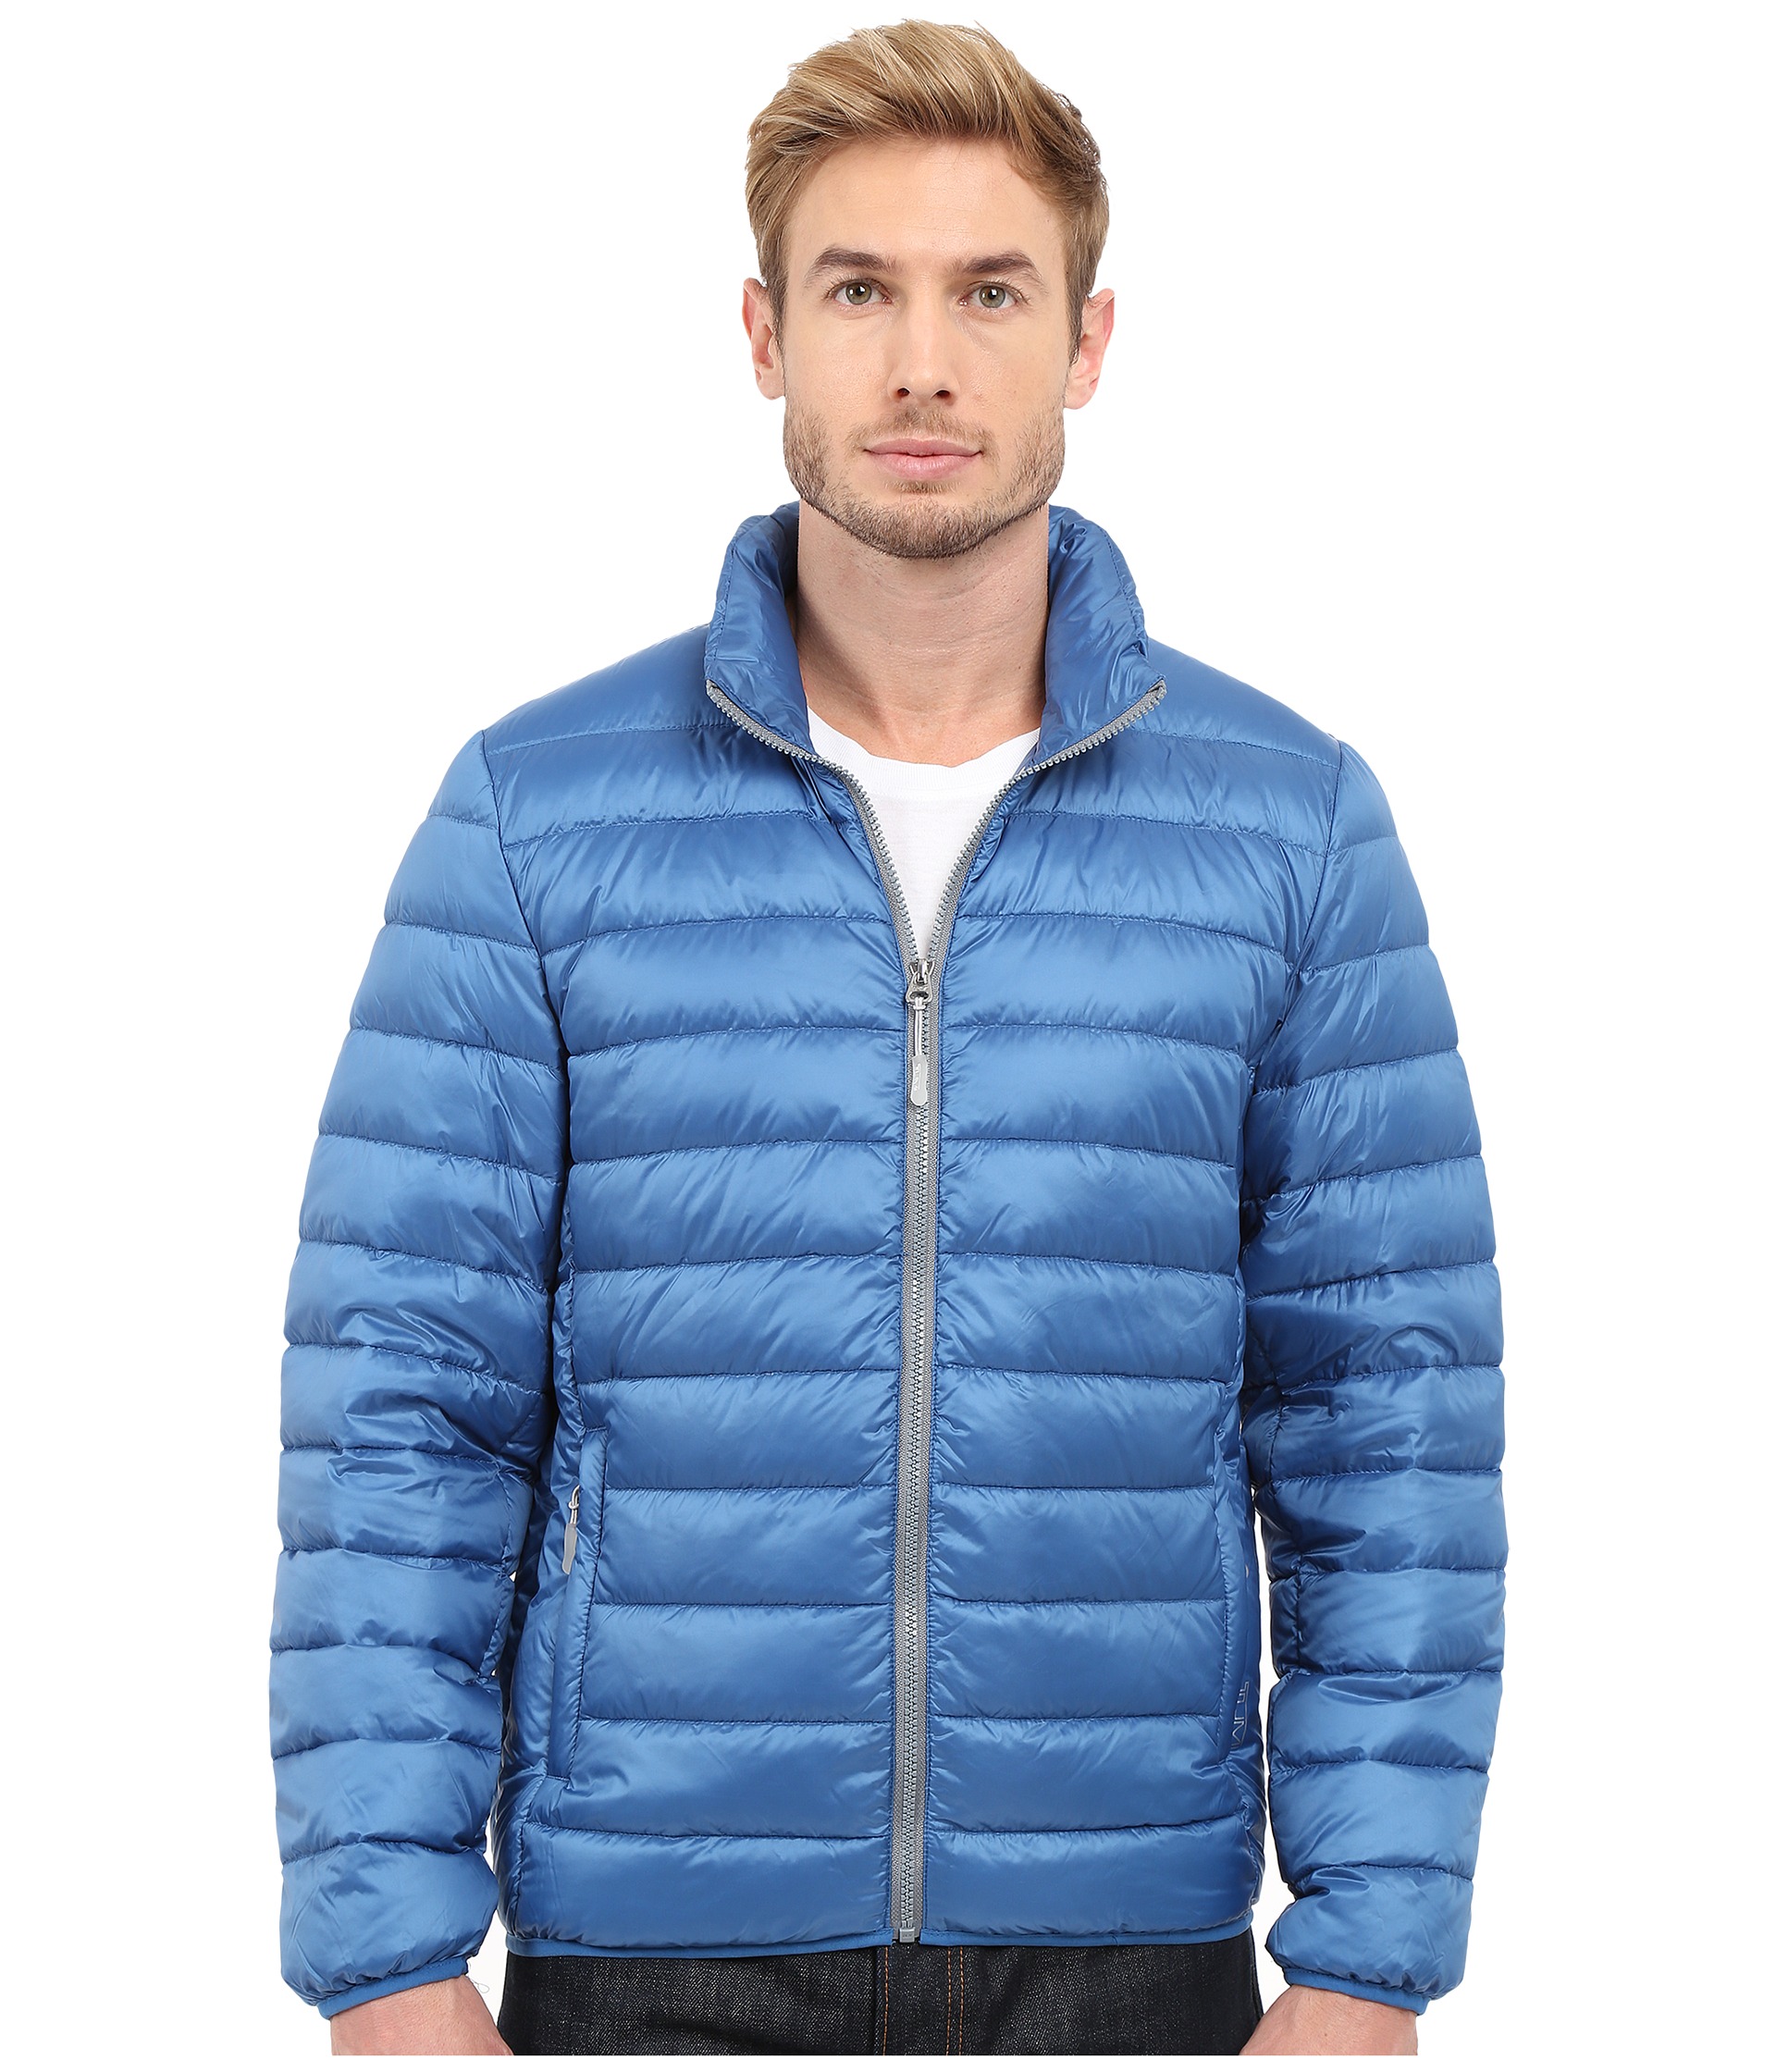 Tumi Patrol Packable Travel Puffer Jacket - Zappos.com Free Shipping ...